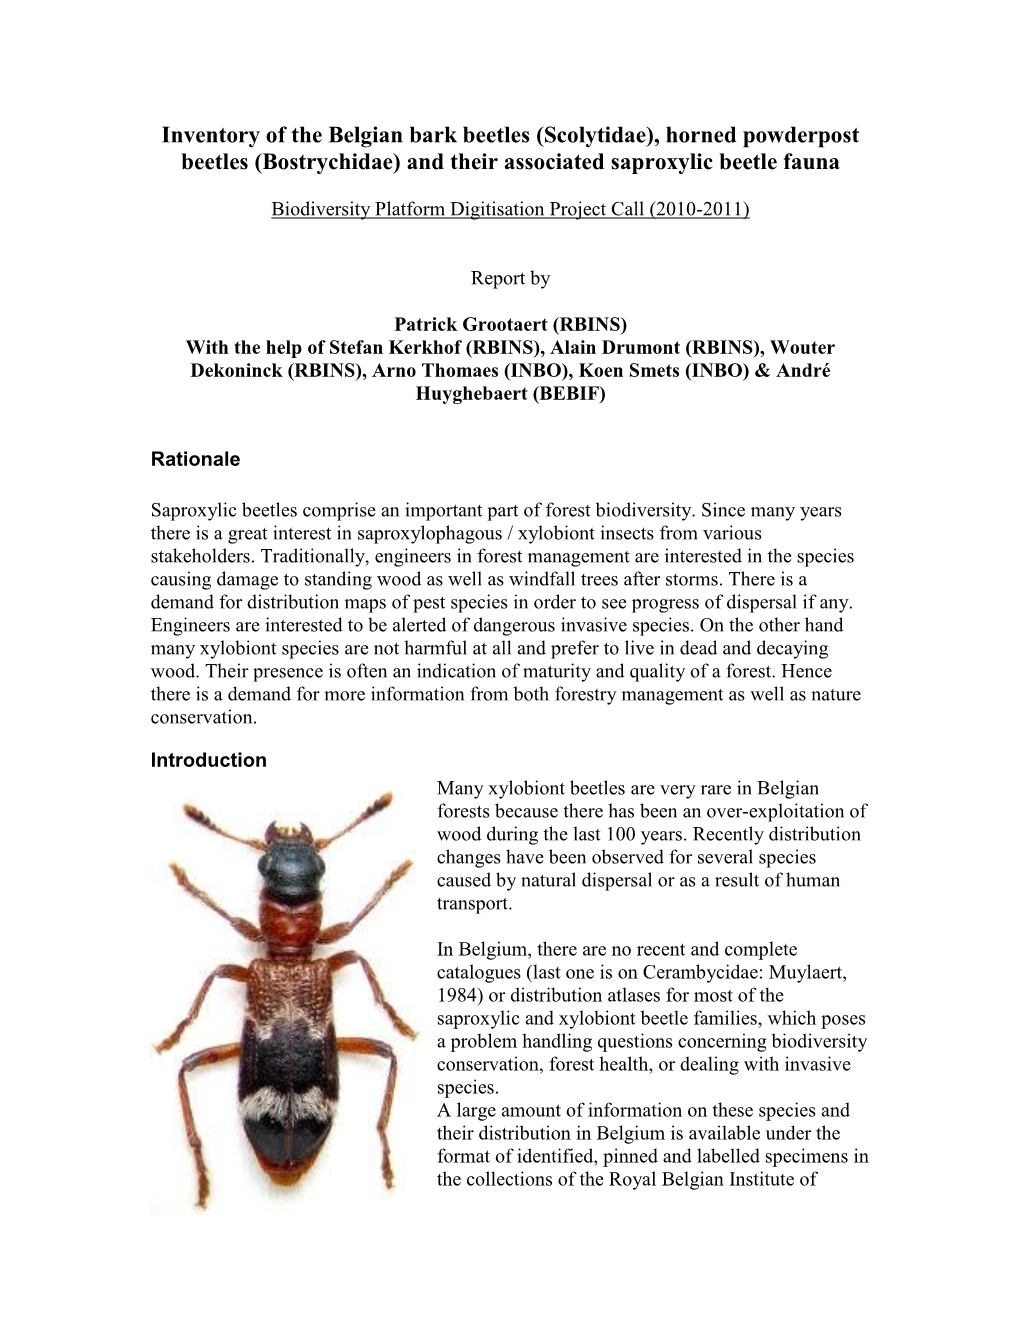 Inventory of the Belgian Bark Beetles (Scolytidae), Horned Powderpost Beetles (Bostrychidae) and Their Associated Saproxylic Beetle Fauna